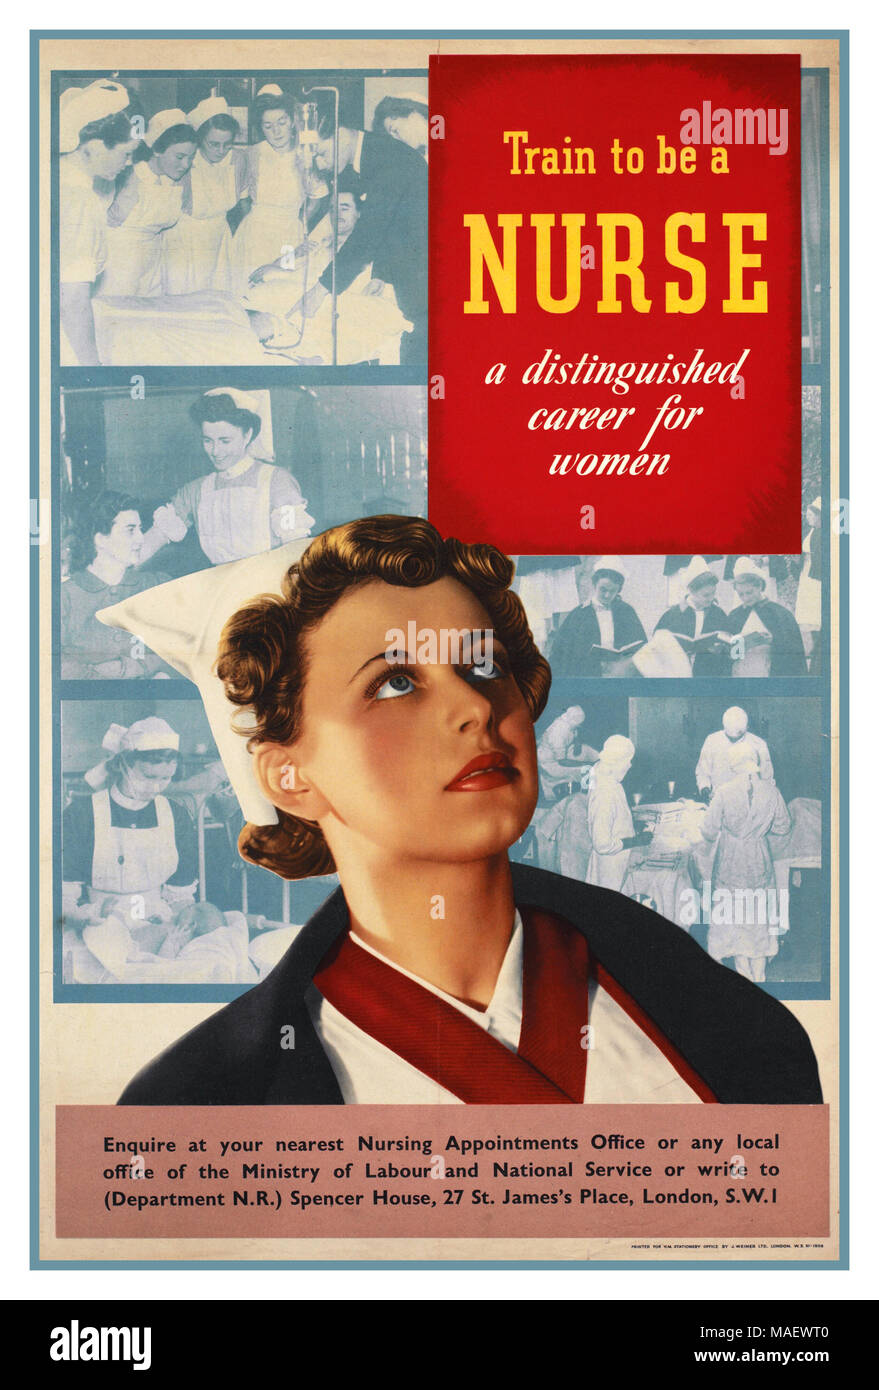 1940’s Vintage UK Nursing Recruitment Poster in WW2 Female nurse in uniform. Other images depict nurses performing various duties, dealing with patients, assisting with an operation, as well as studying . ‘Train to be a NURSE a distinguished career for women’   ‘Enquire at your nearest Nursing Appointments Office or any local office of the Ministry of Labour and National Service’ 1940 Stock Photo